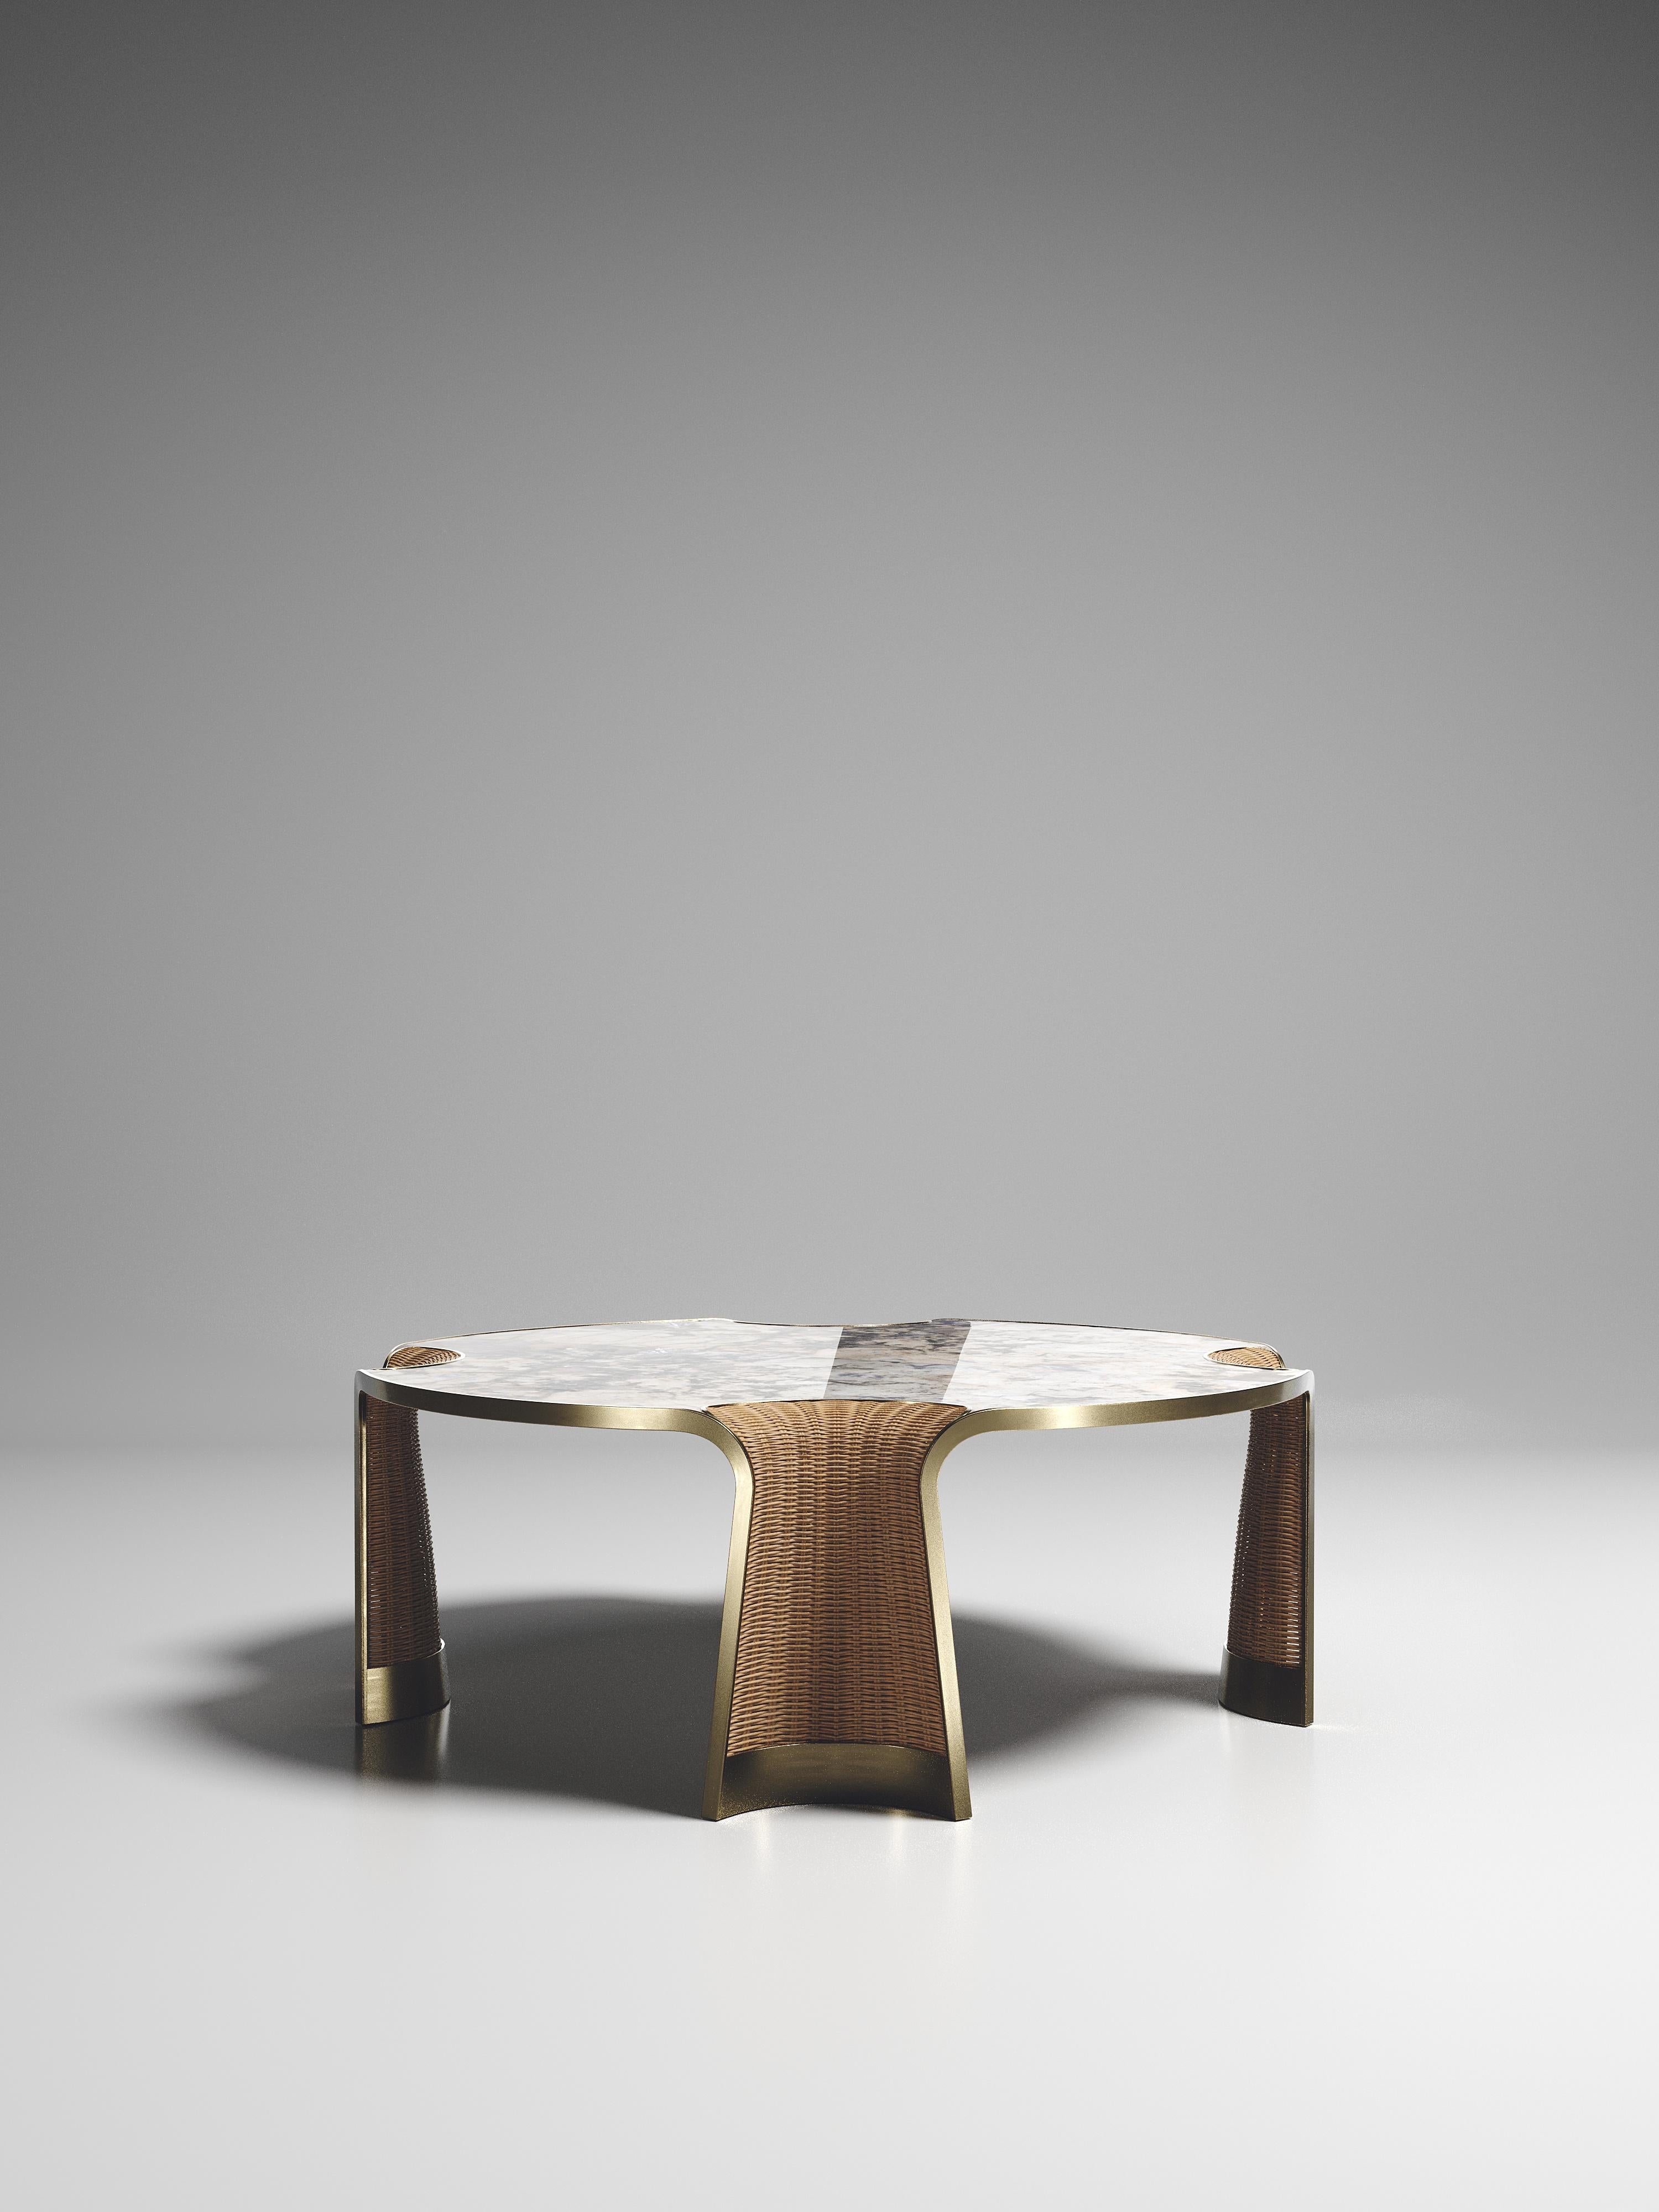 The Nymphea Round Coffee by R & Y Augousti is a part of their new Rattan capsule launch. The piece explores the brand's iconic DNA of bringing old world artisanal craft into a contemporary and utterly luxury feel. This table is done in a natural